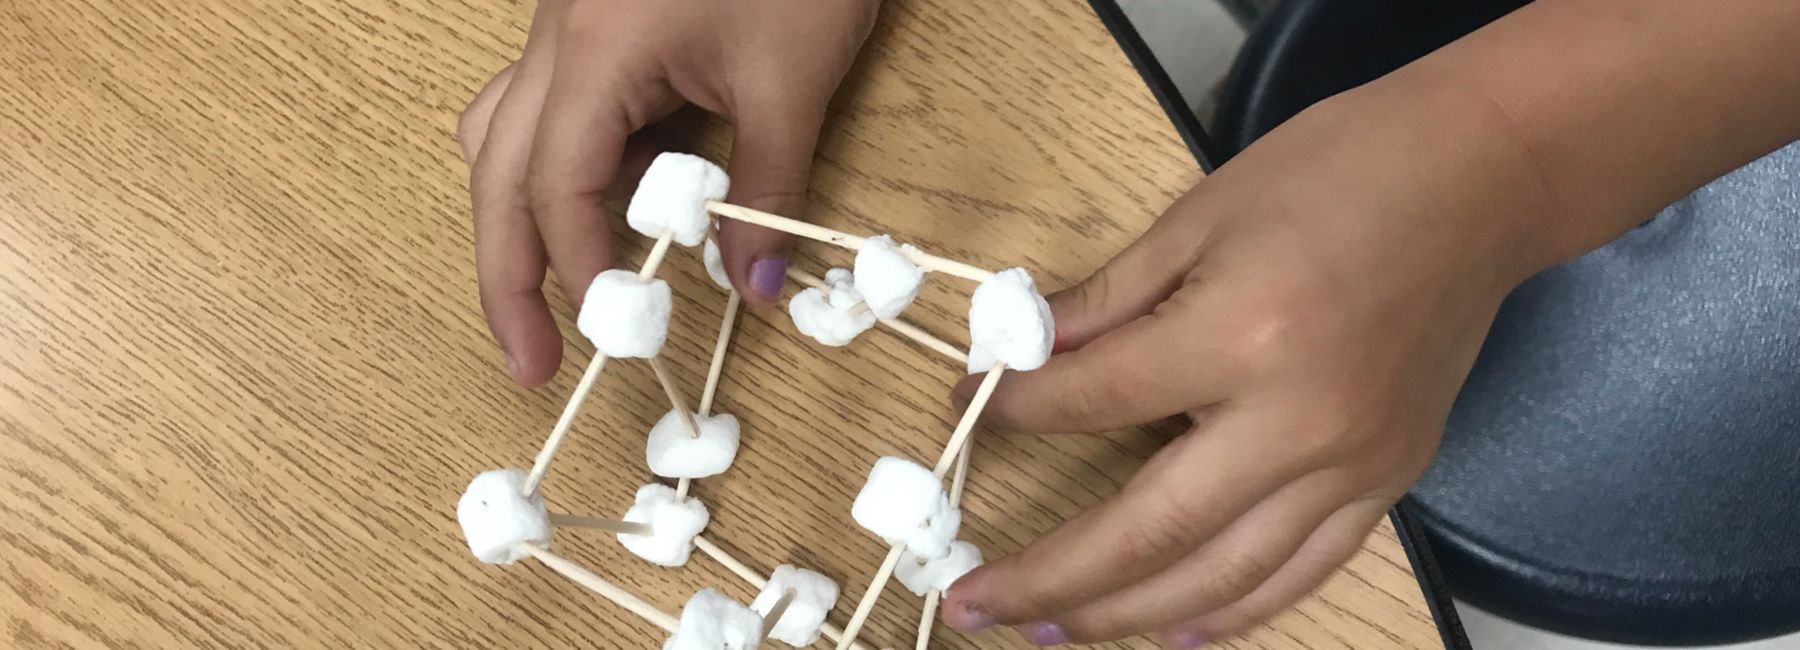 Running STEM activities for RecPAC summer campers